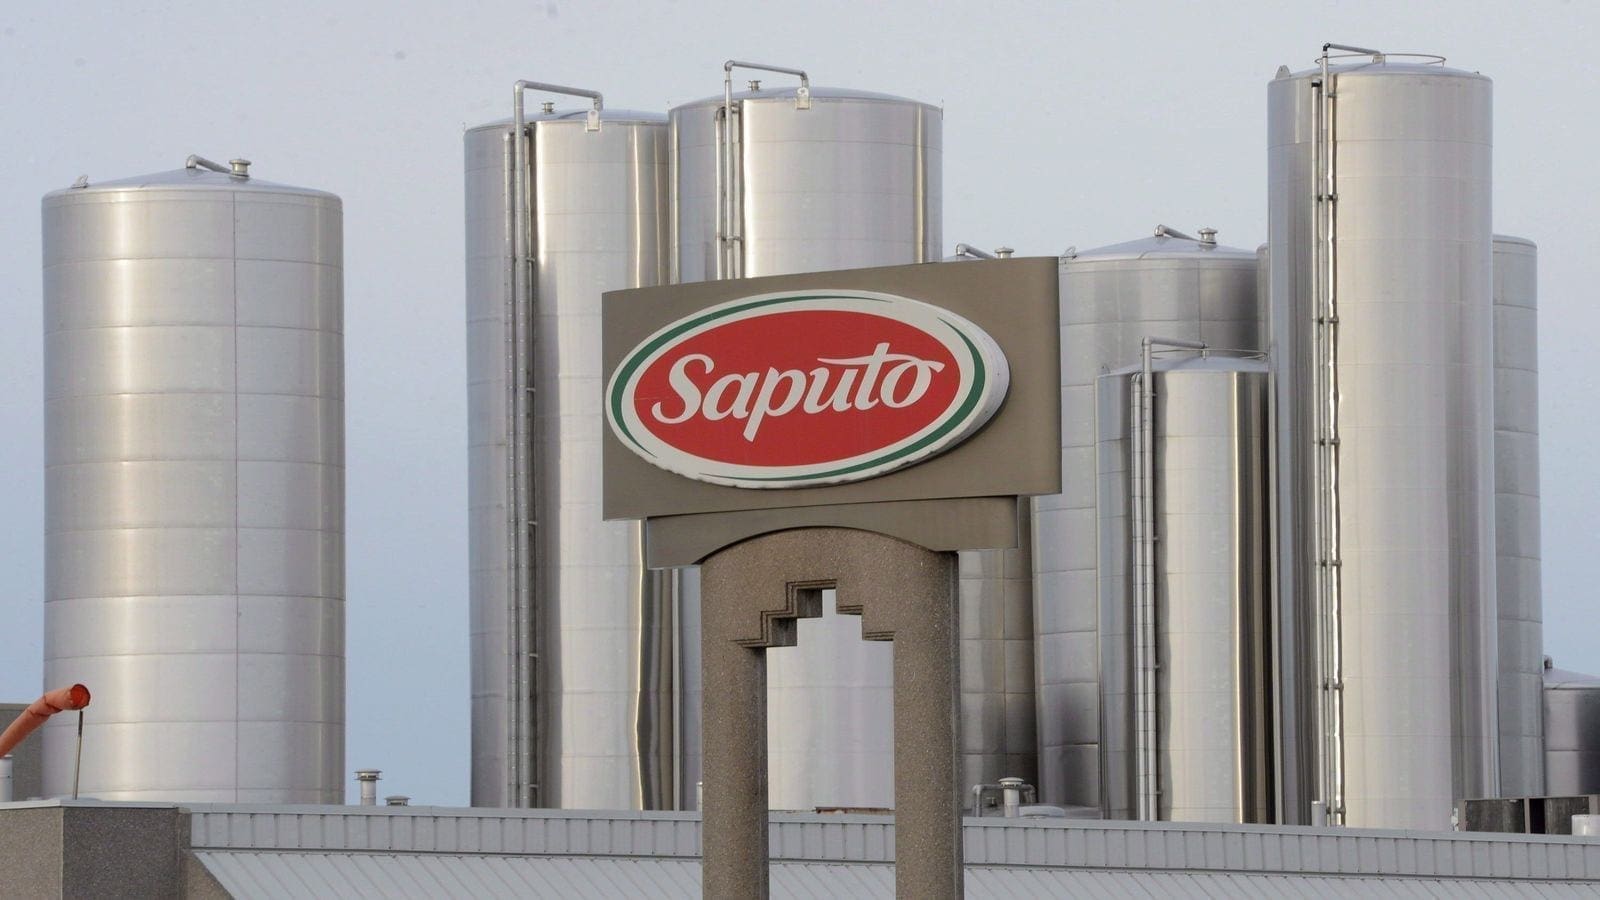 Canadian dairy giant Saputo to build cheese facility in US, closes three other facilities